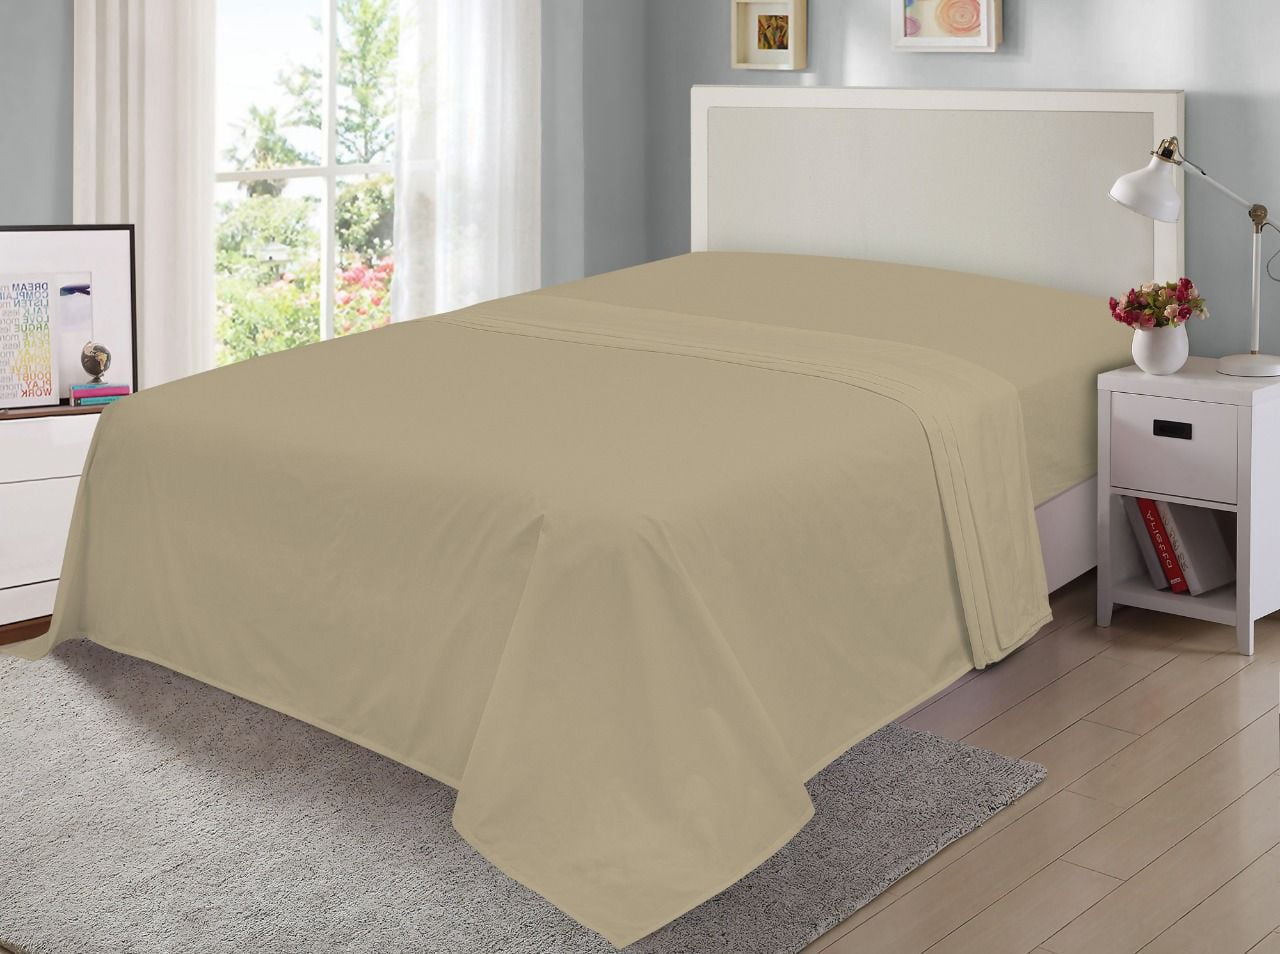 Mainstays 300TC Cotton Rich Percale Easy Care Bed Sheet Set,BrownStone Twin/Twin XL Flat Sheet